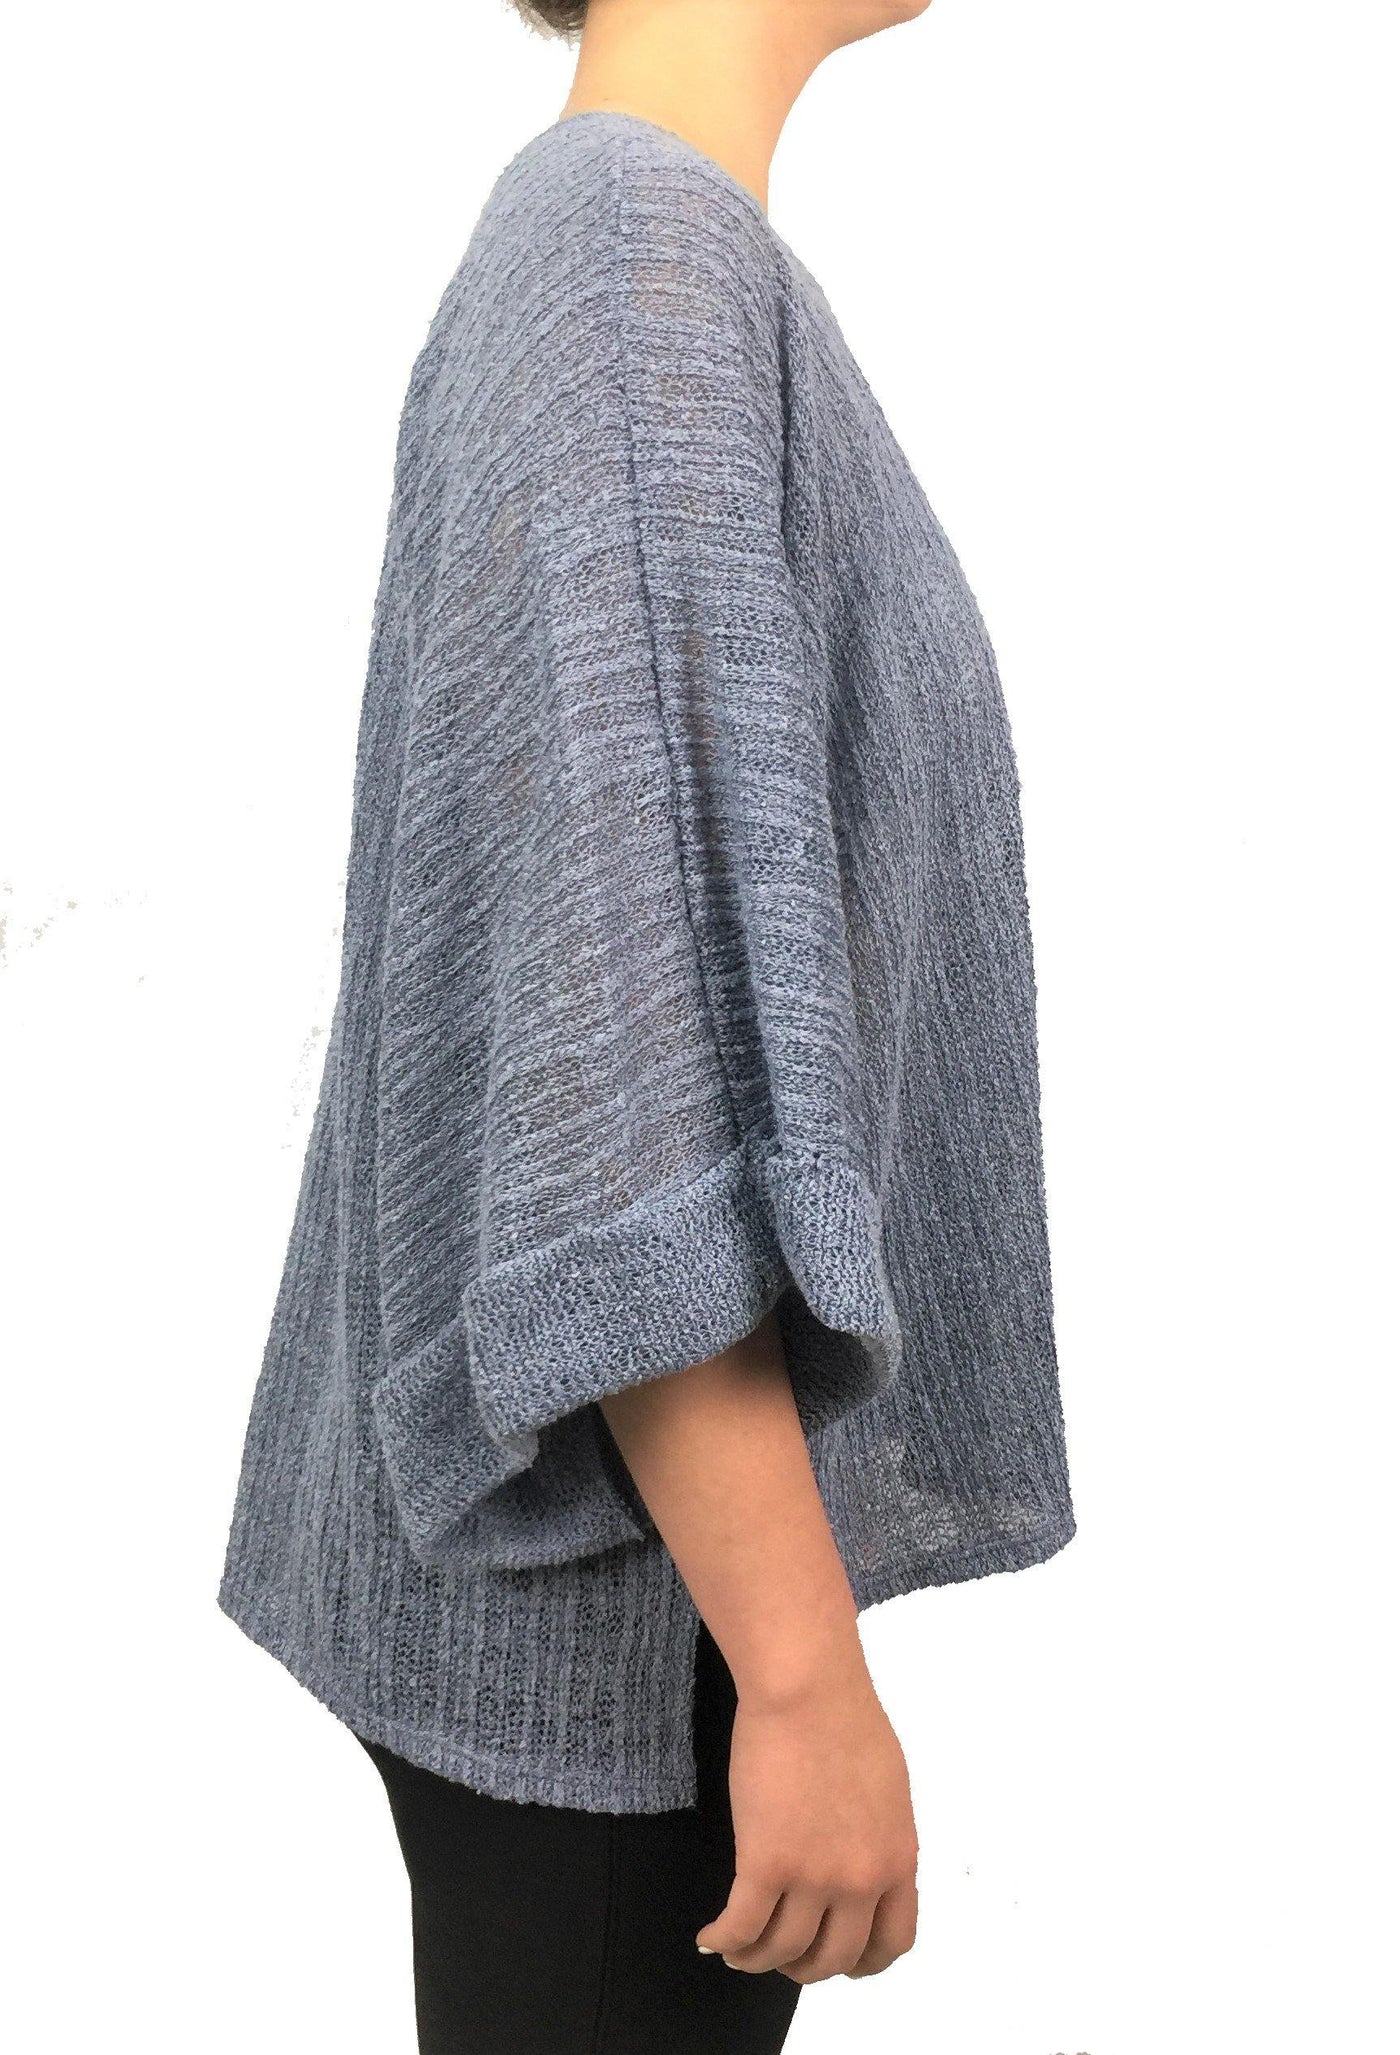 Brand: Pixi and Ivy - Oversized Cuff Sleeve Slate Blue Boxy Top -  Blouse, Blue, Boxy, Clothes, made in usa, oversized, Shirt, soft, Spring, Summer, vacation, Wardrobe Essentials, Women - Classy Cozy Cool Boutique